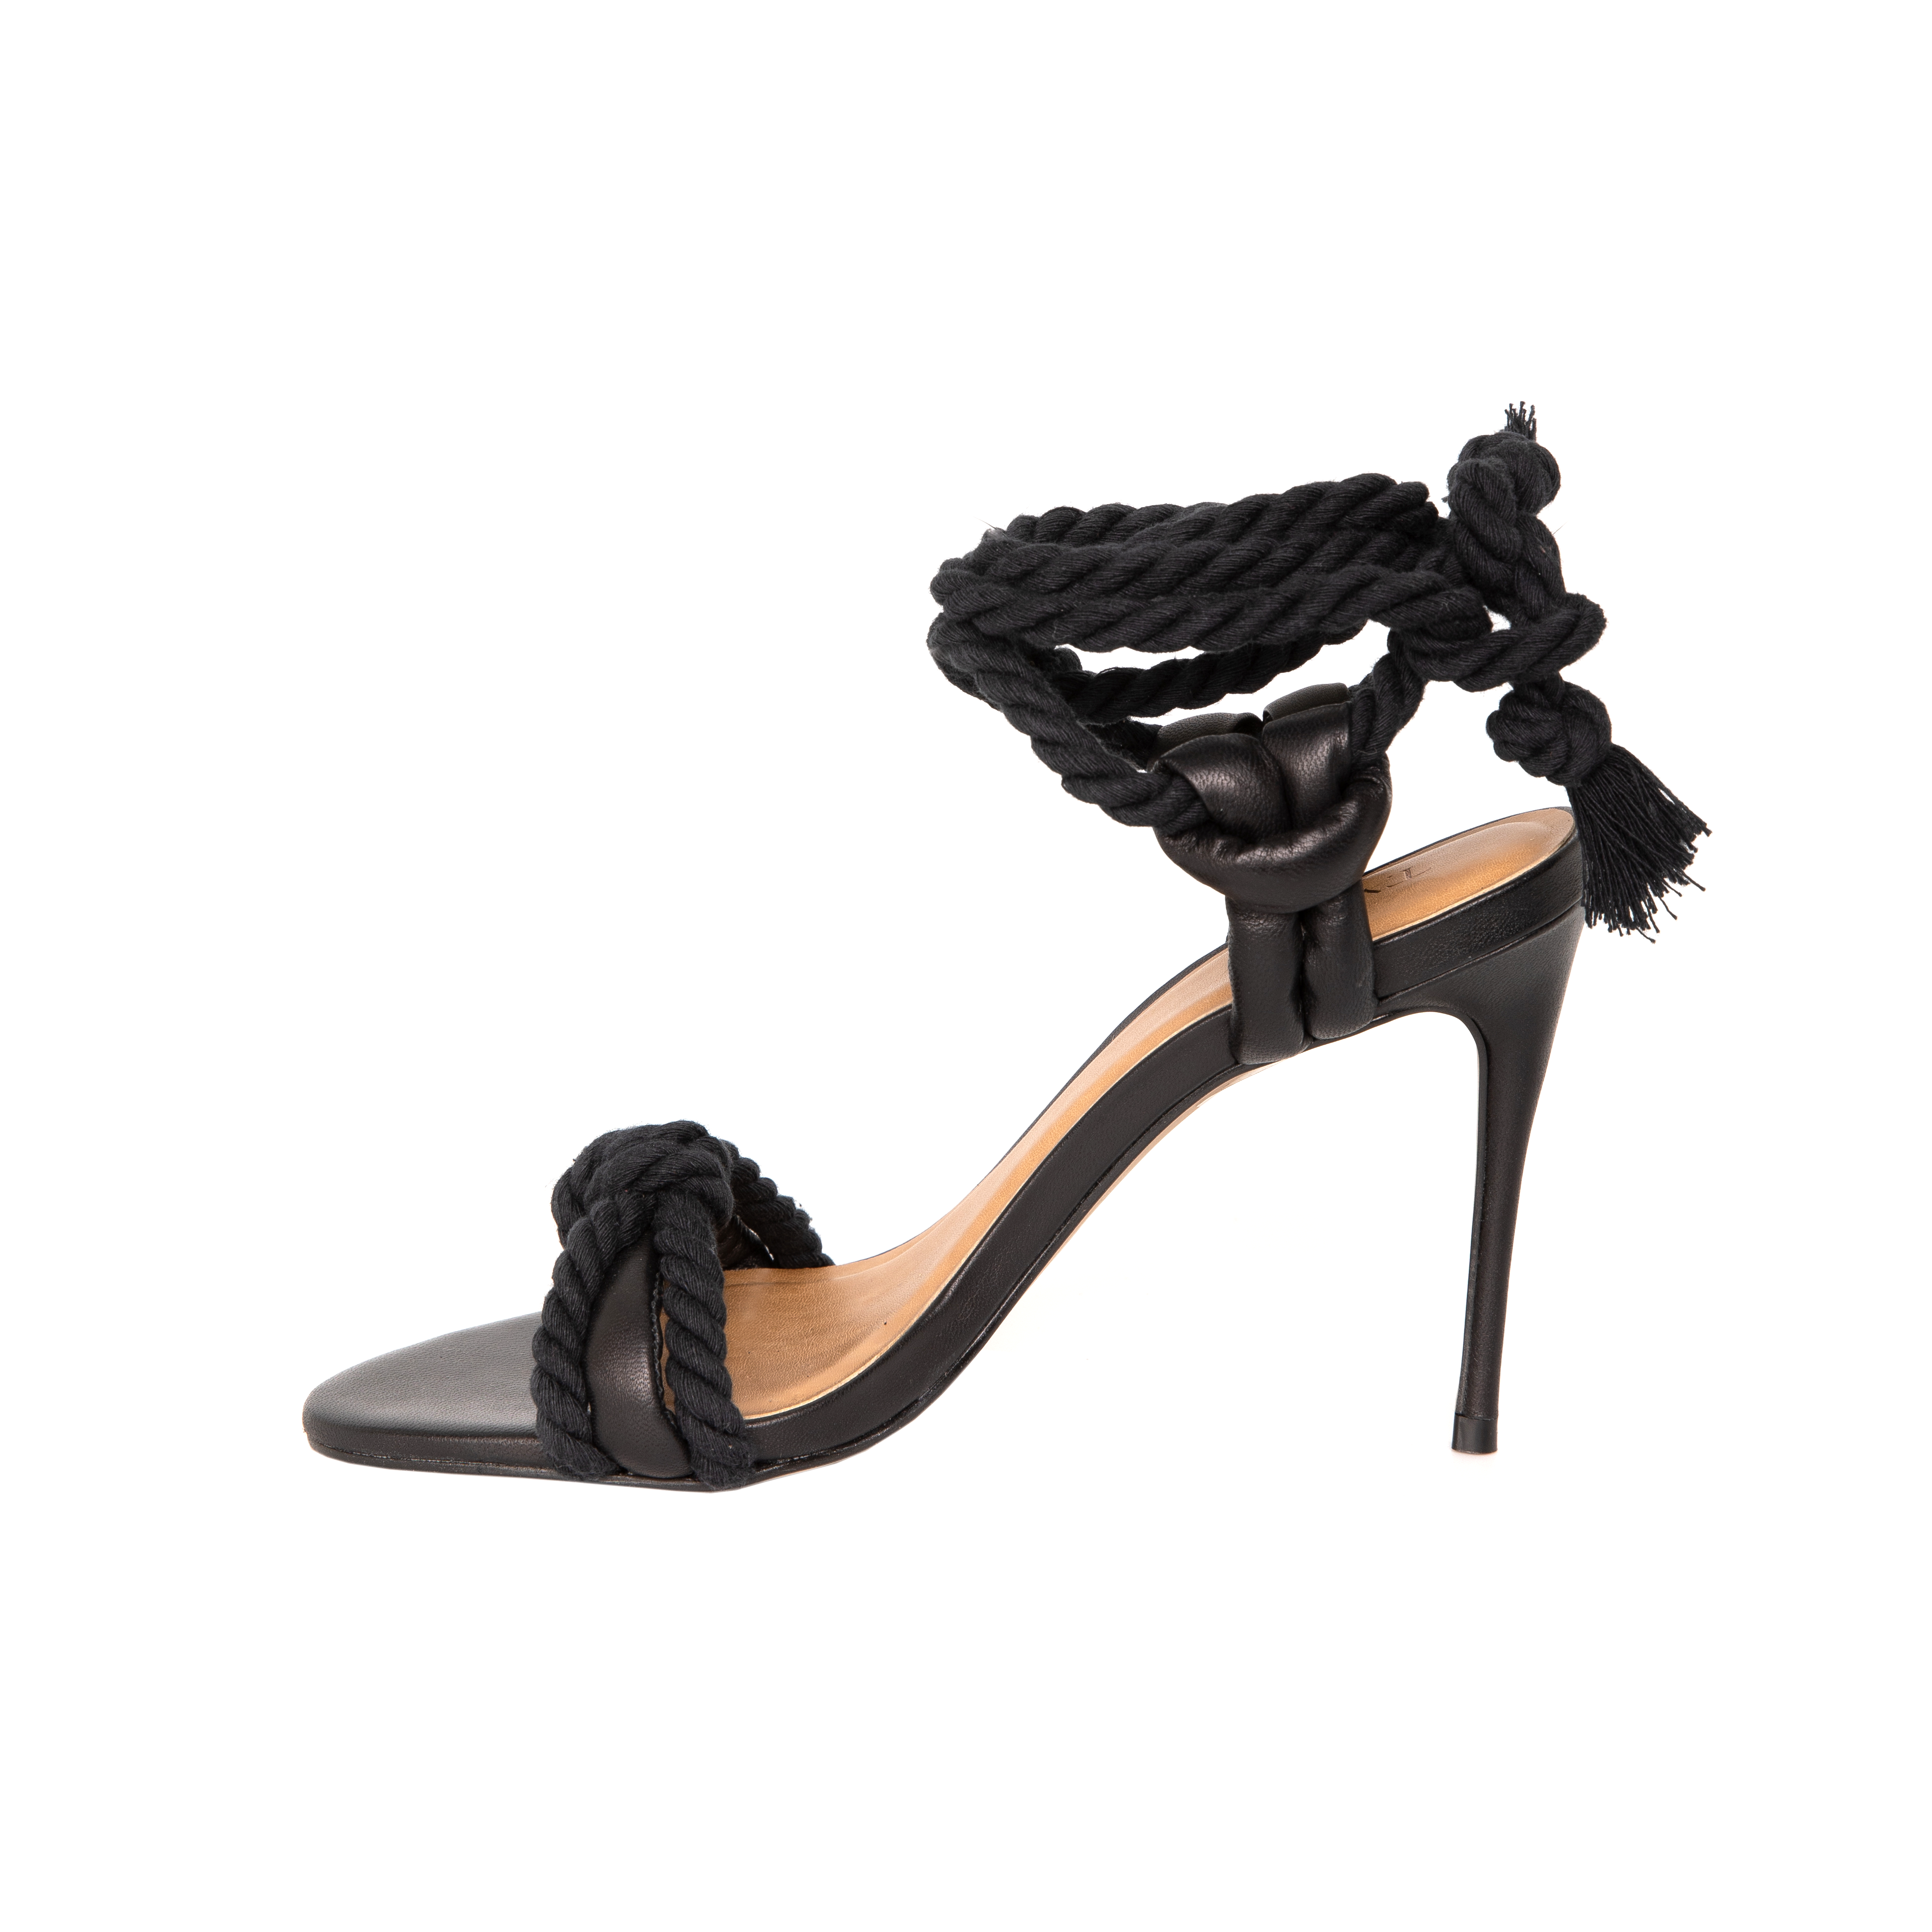 Arenisca Lace up High Heel Leather Sandals - Black Heels TARBAY   